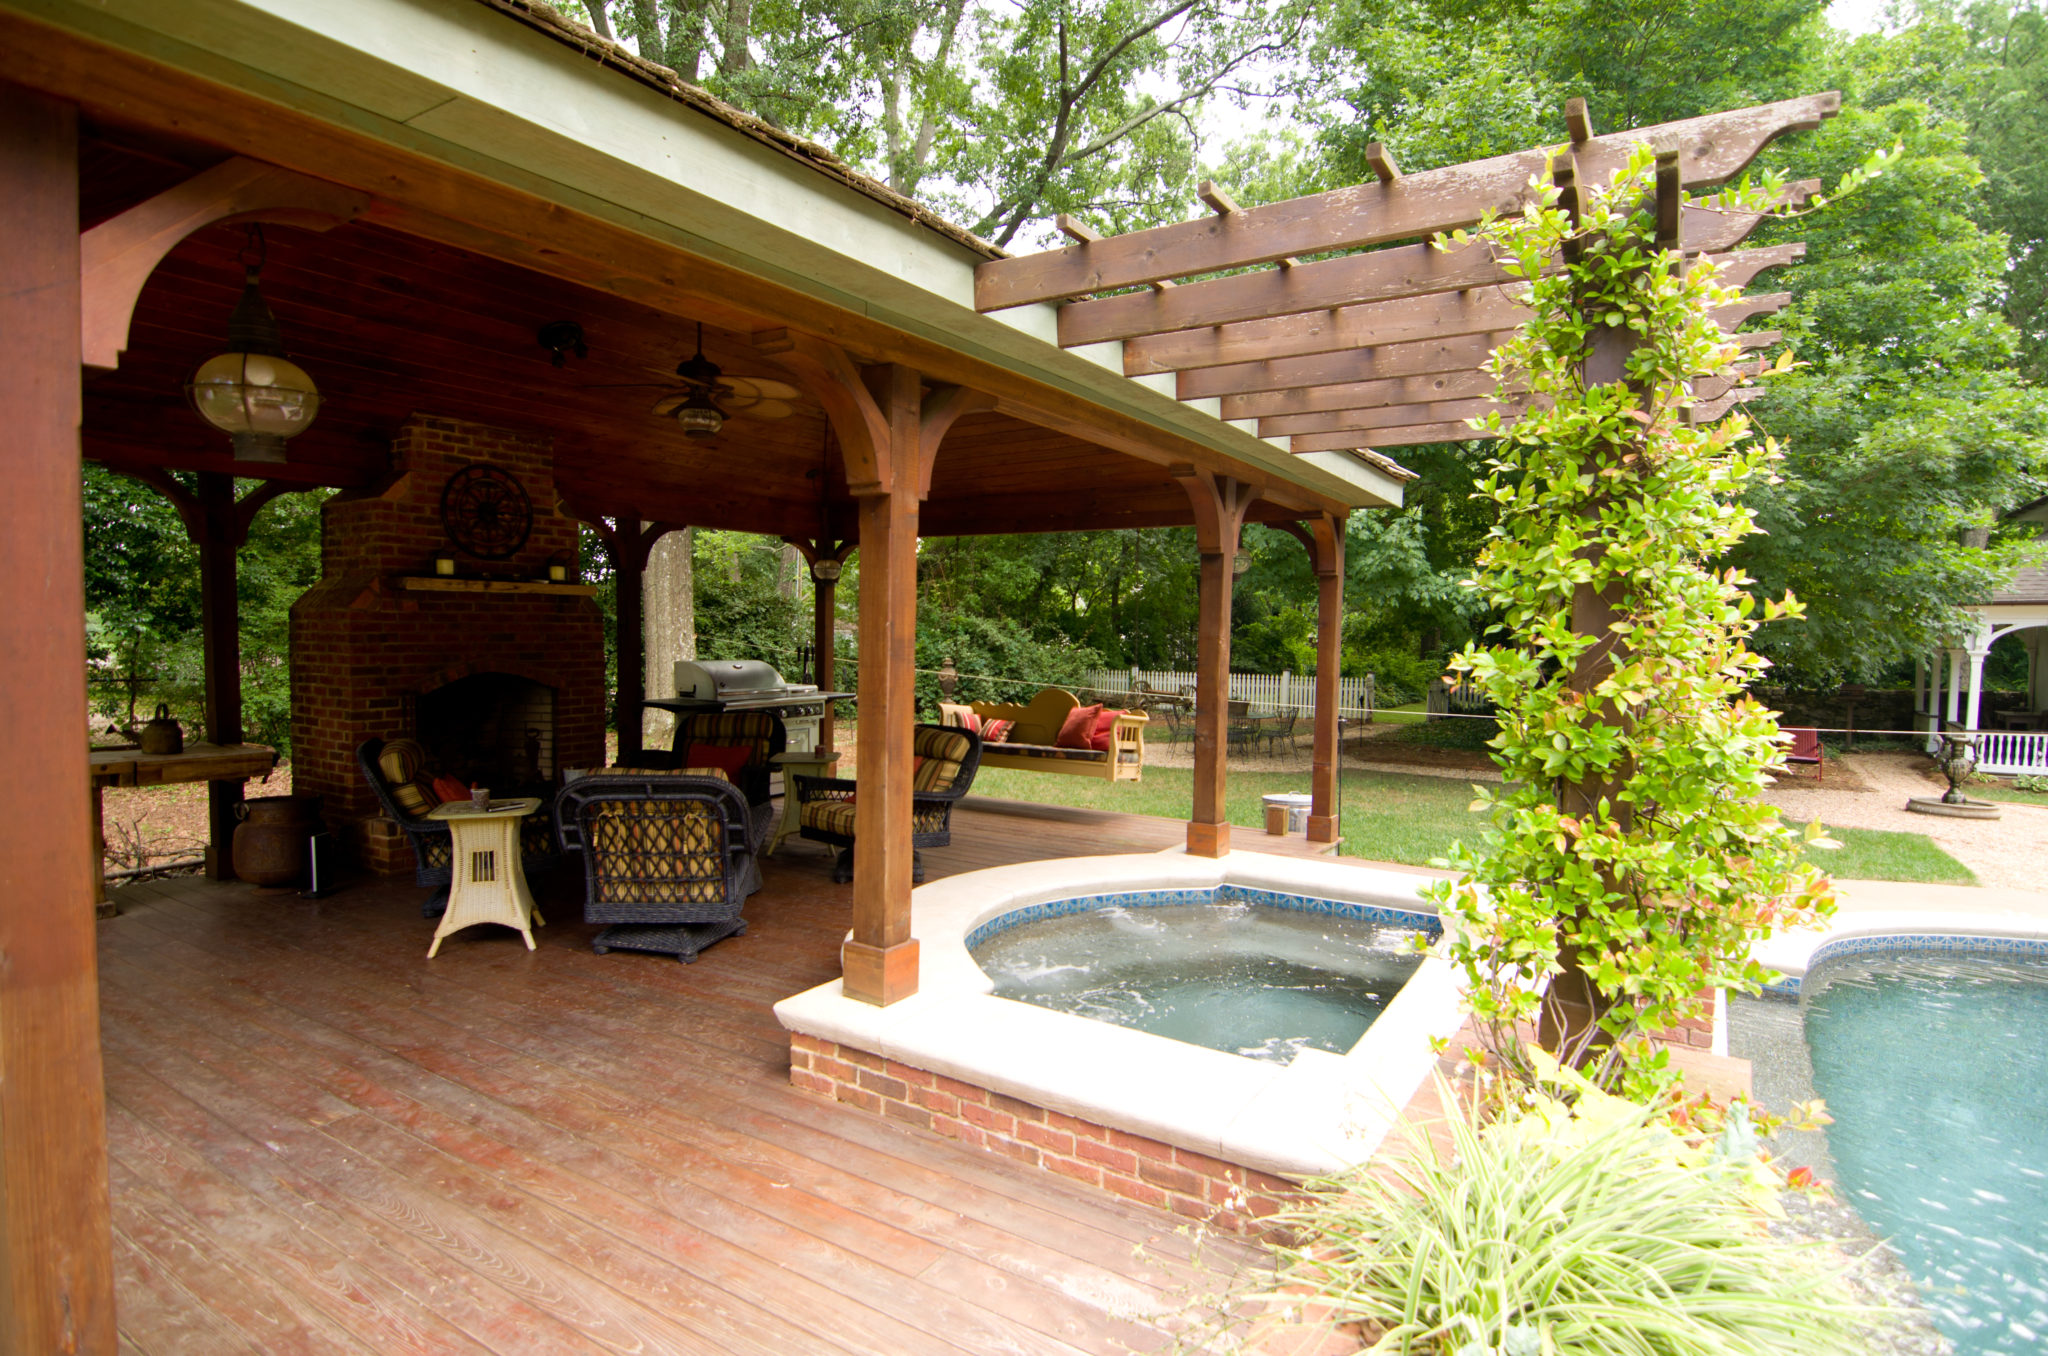 A picturesque wood vaulted cabana with pergola and fireplace next to a swimming pool.